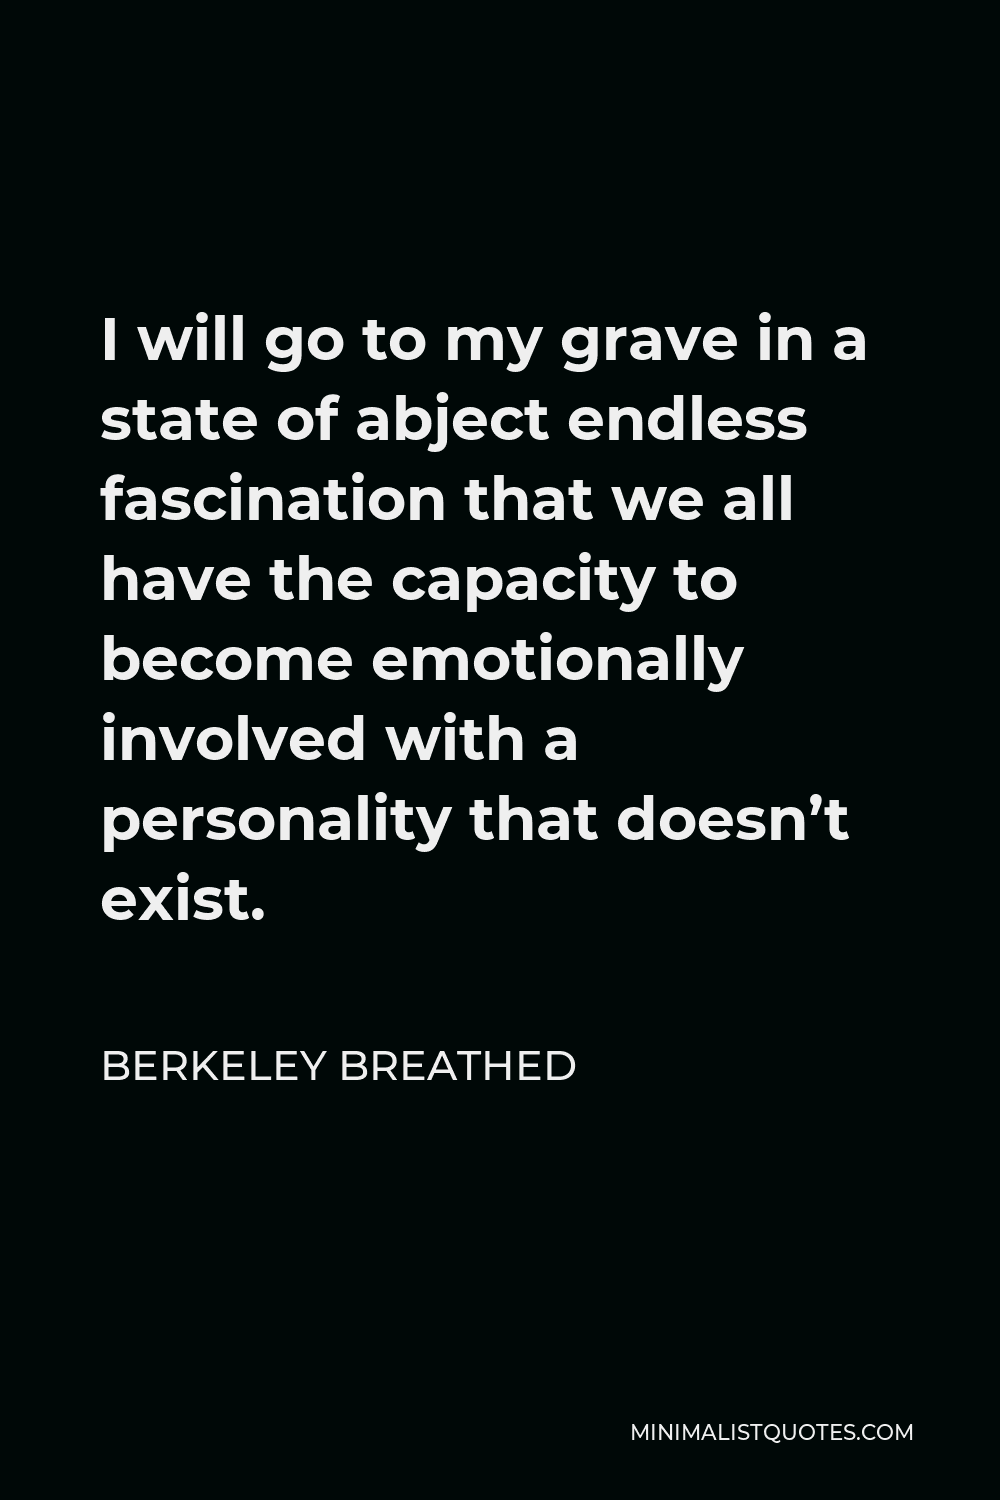 Berkeley Breathed Quote - I will go to my grave in a state of abject endless fascination that we all have the capacity to become emotionally involved with a personality that doesn’t exist.